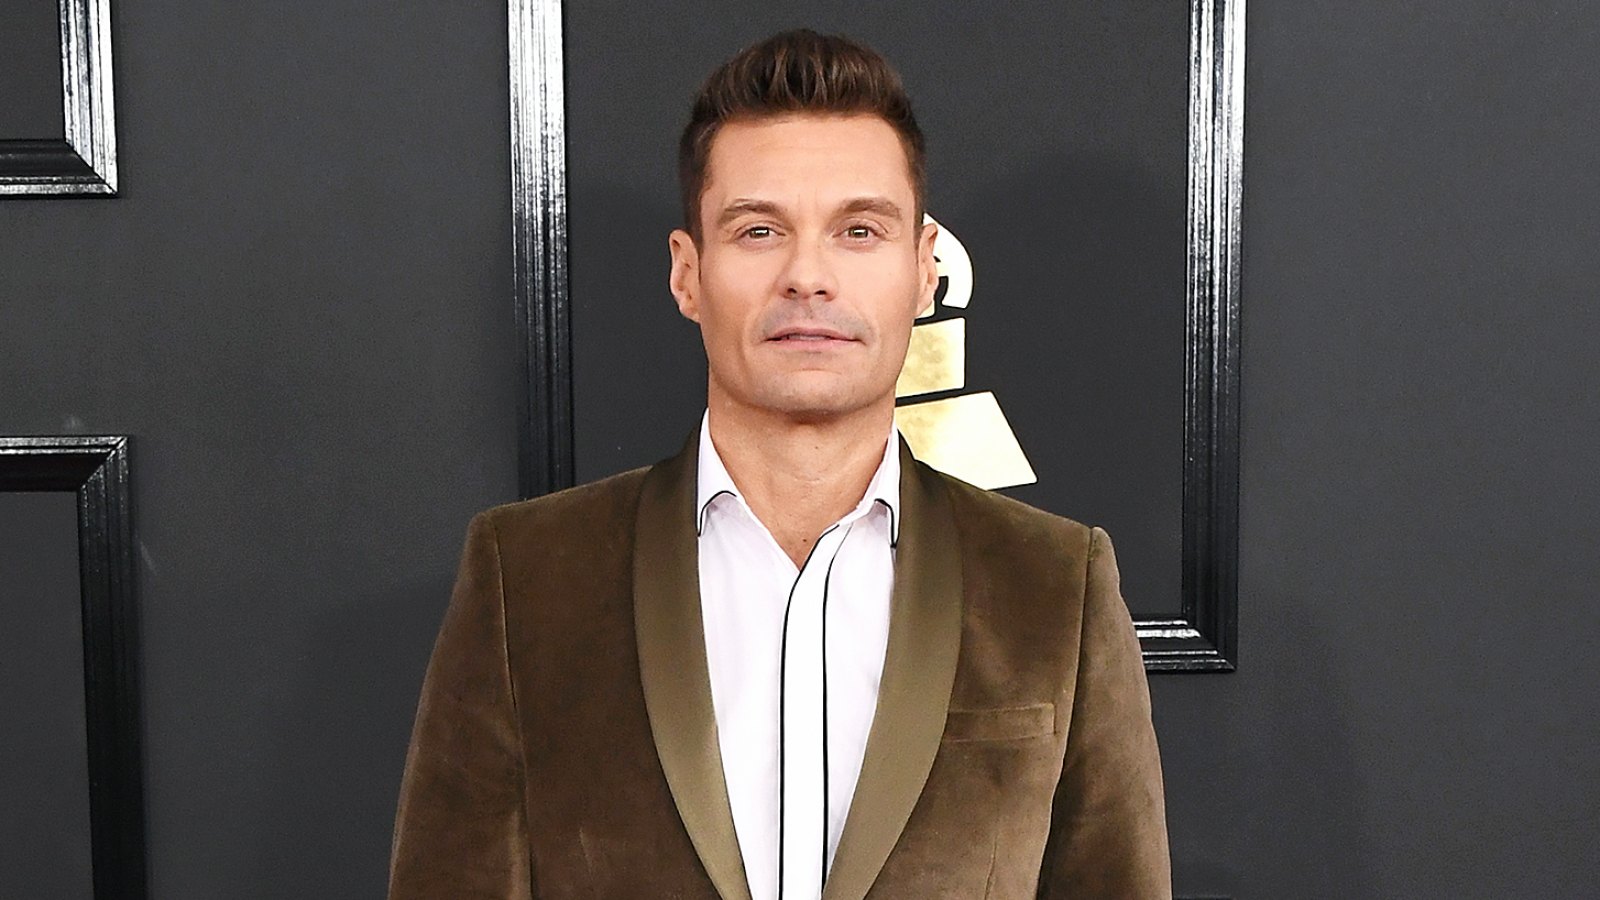 Ryan Seacrest Accused of Sexual Abuse and Harassment